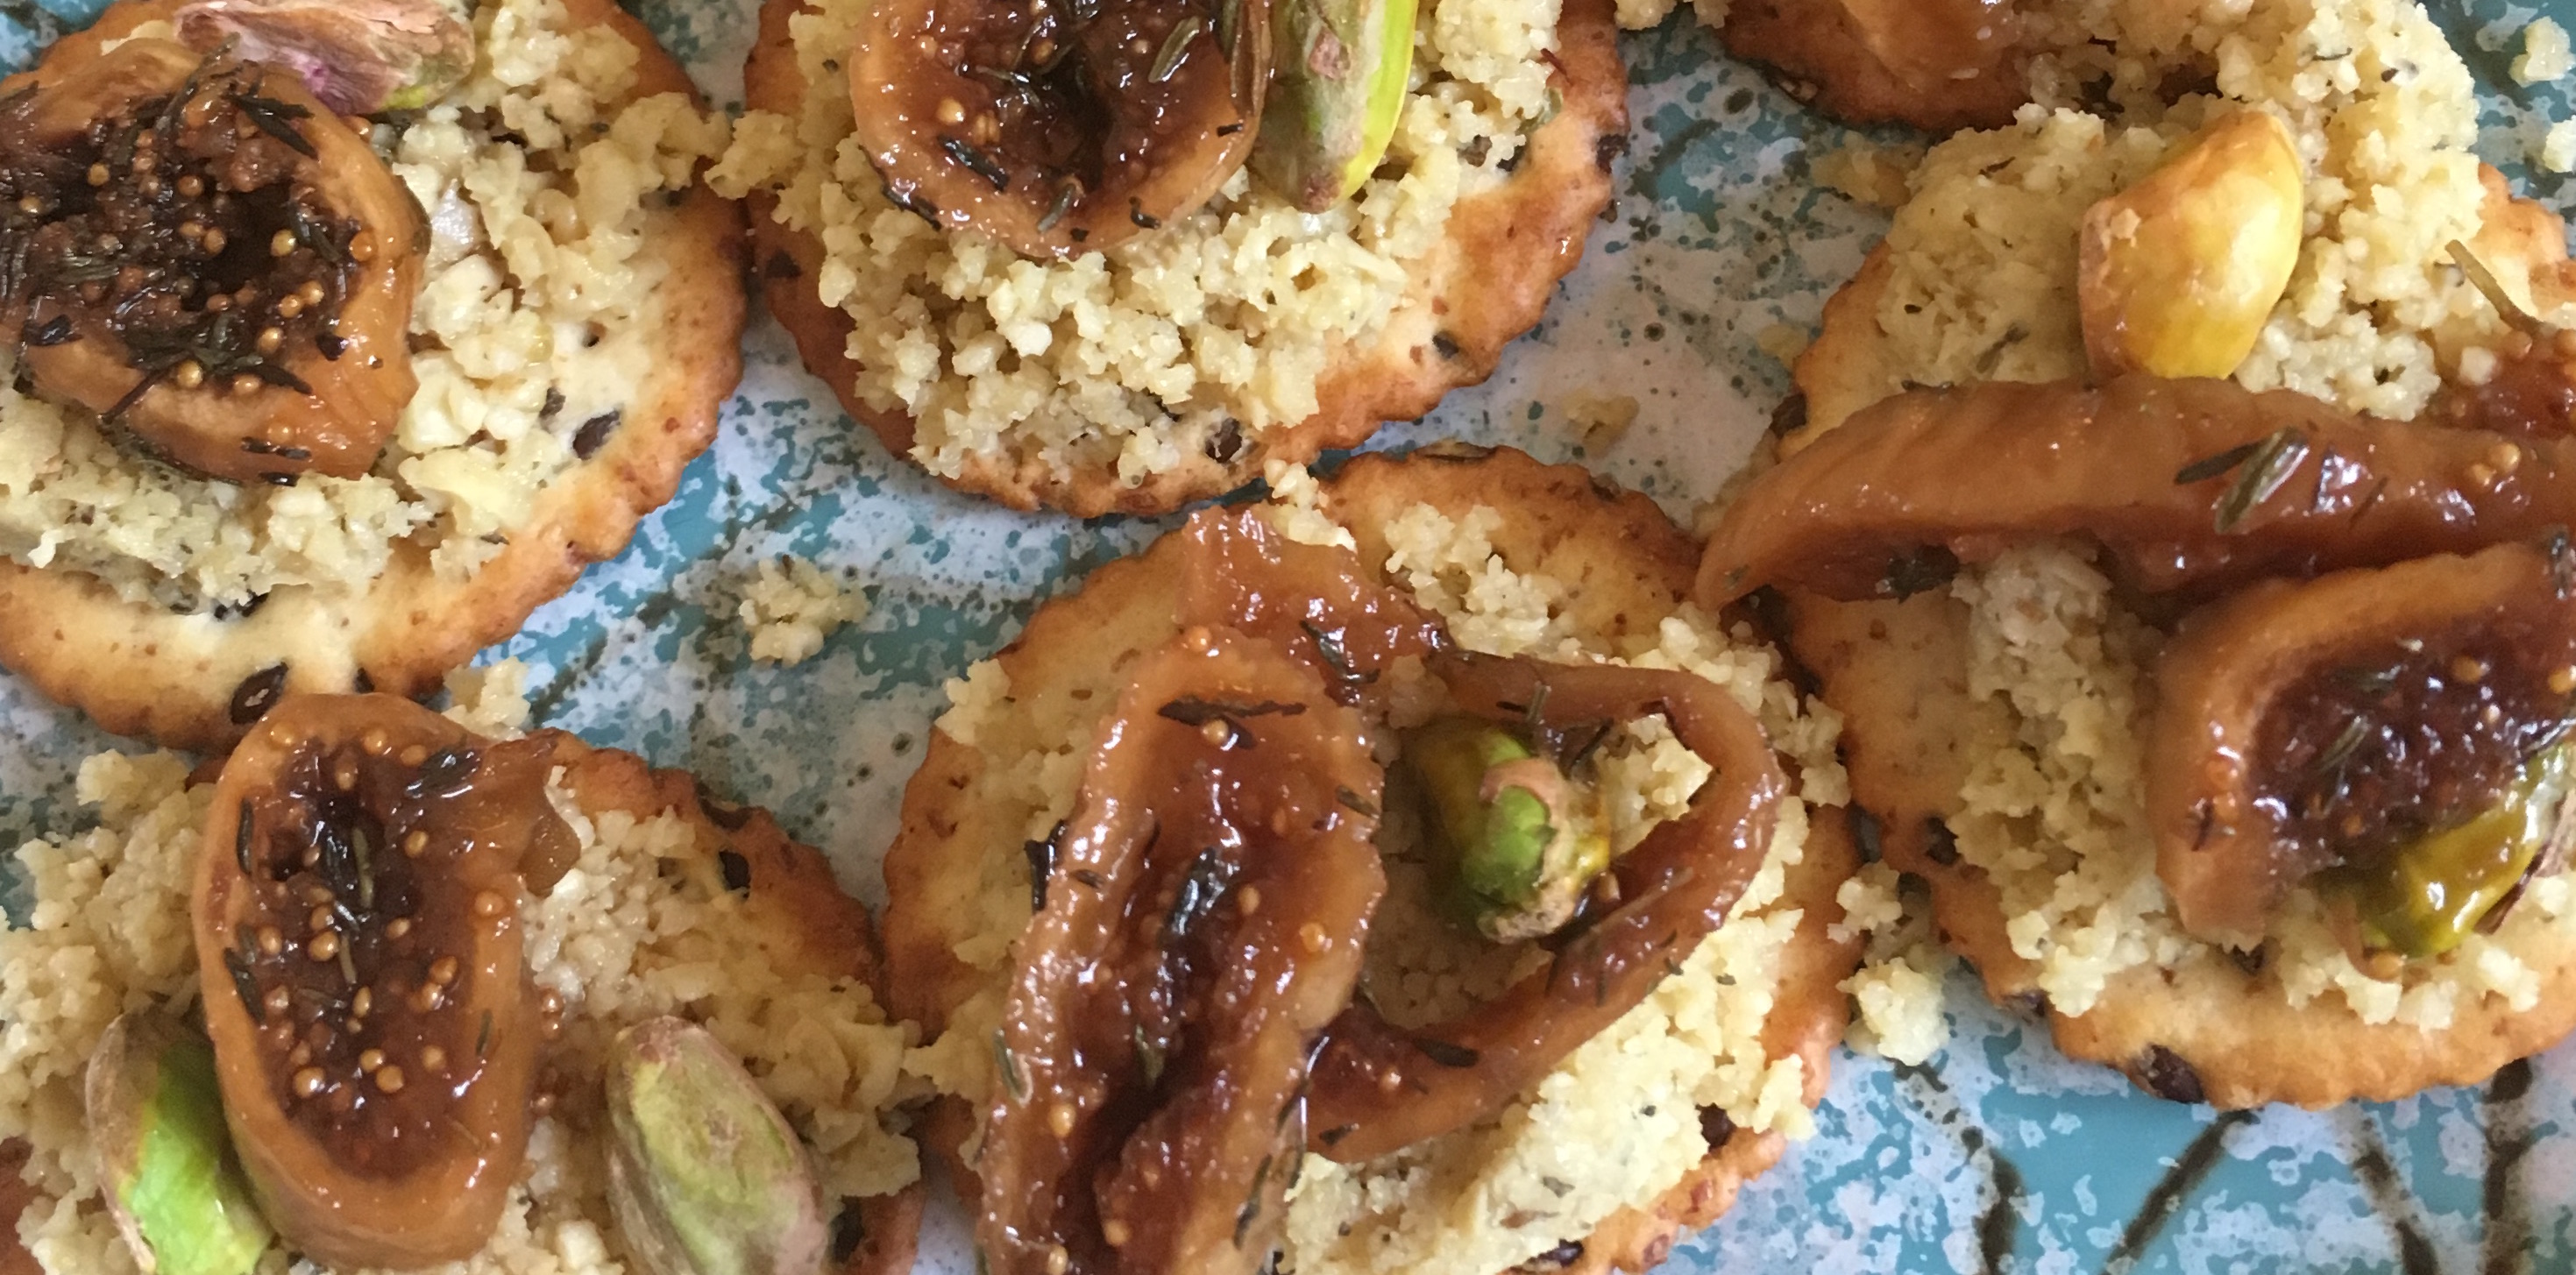 PICKLED FIG, PISTACHIO AND CASHEW ‘RICOTTA’ CANAPES – EASY VEGAN RECIPE